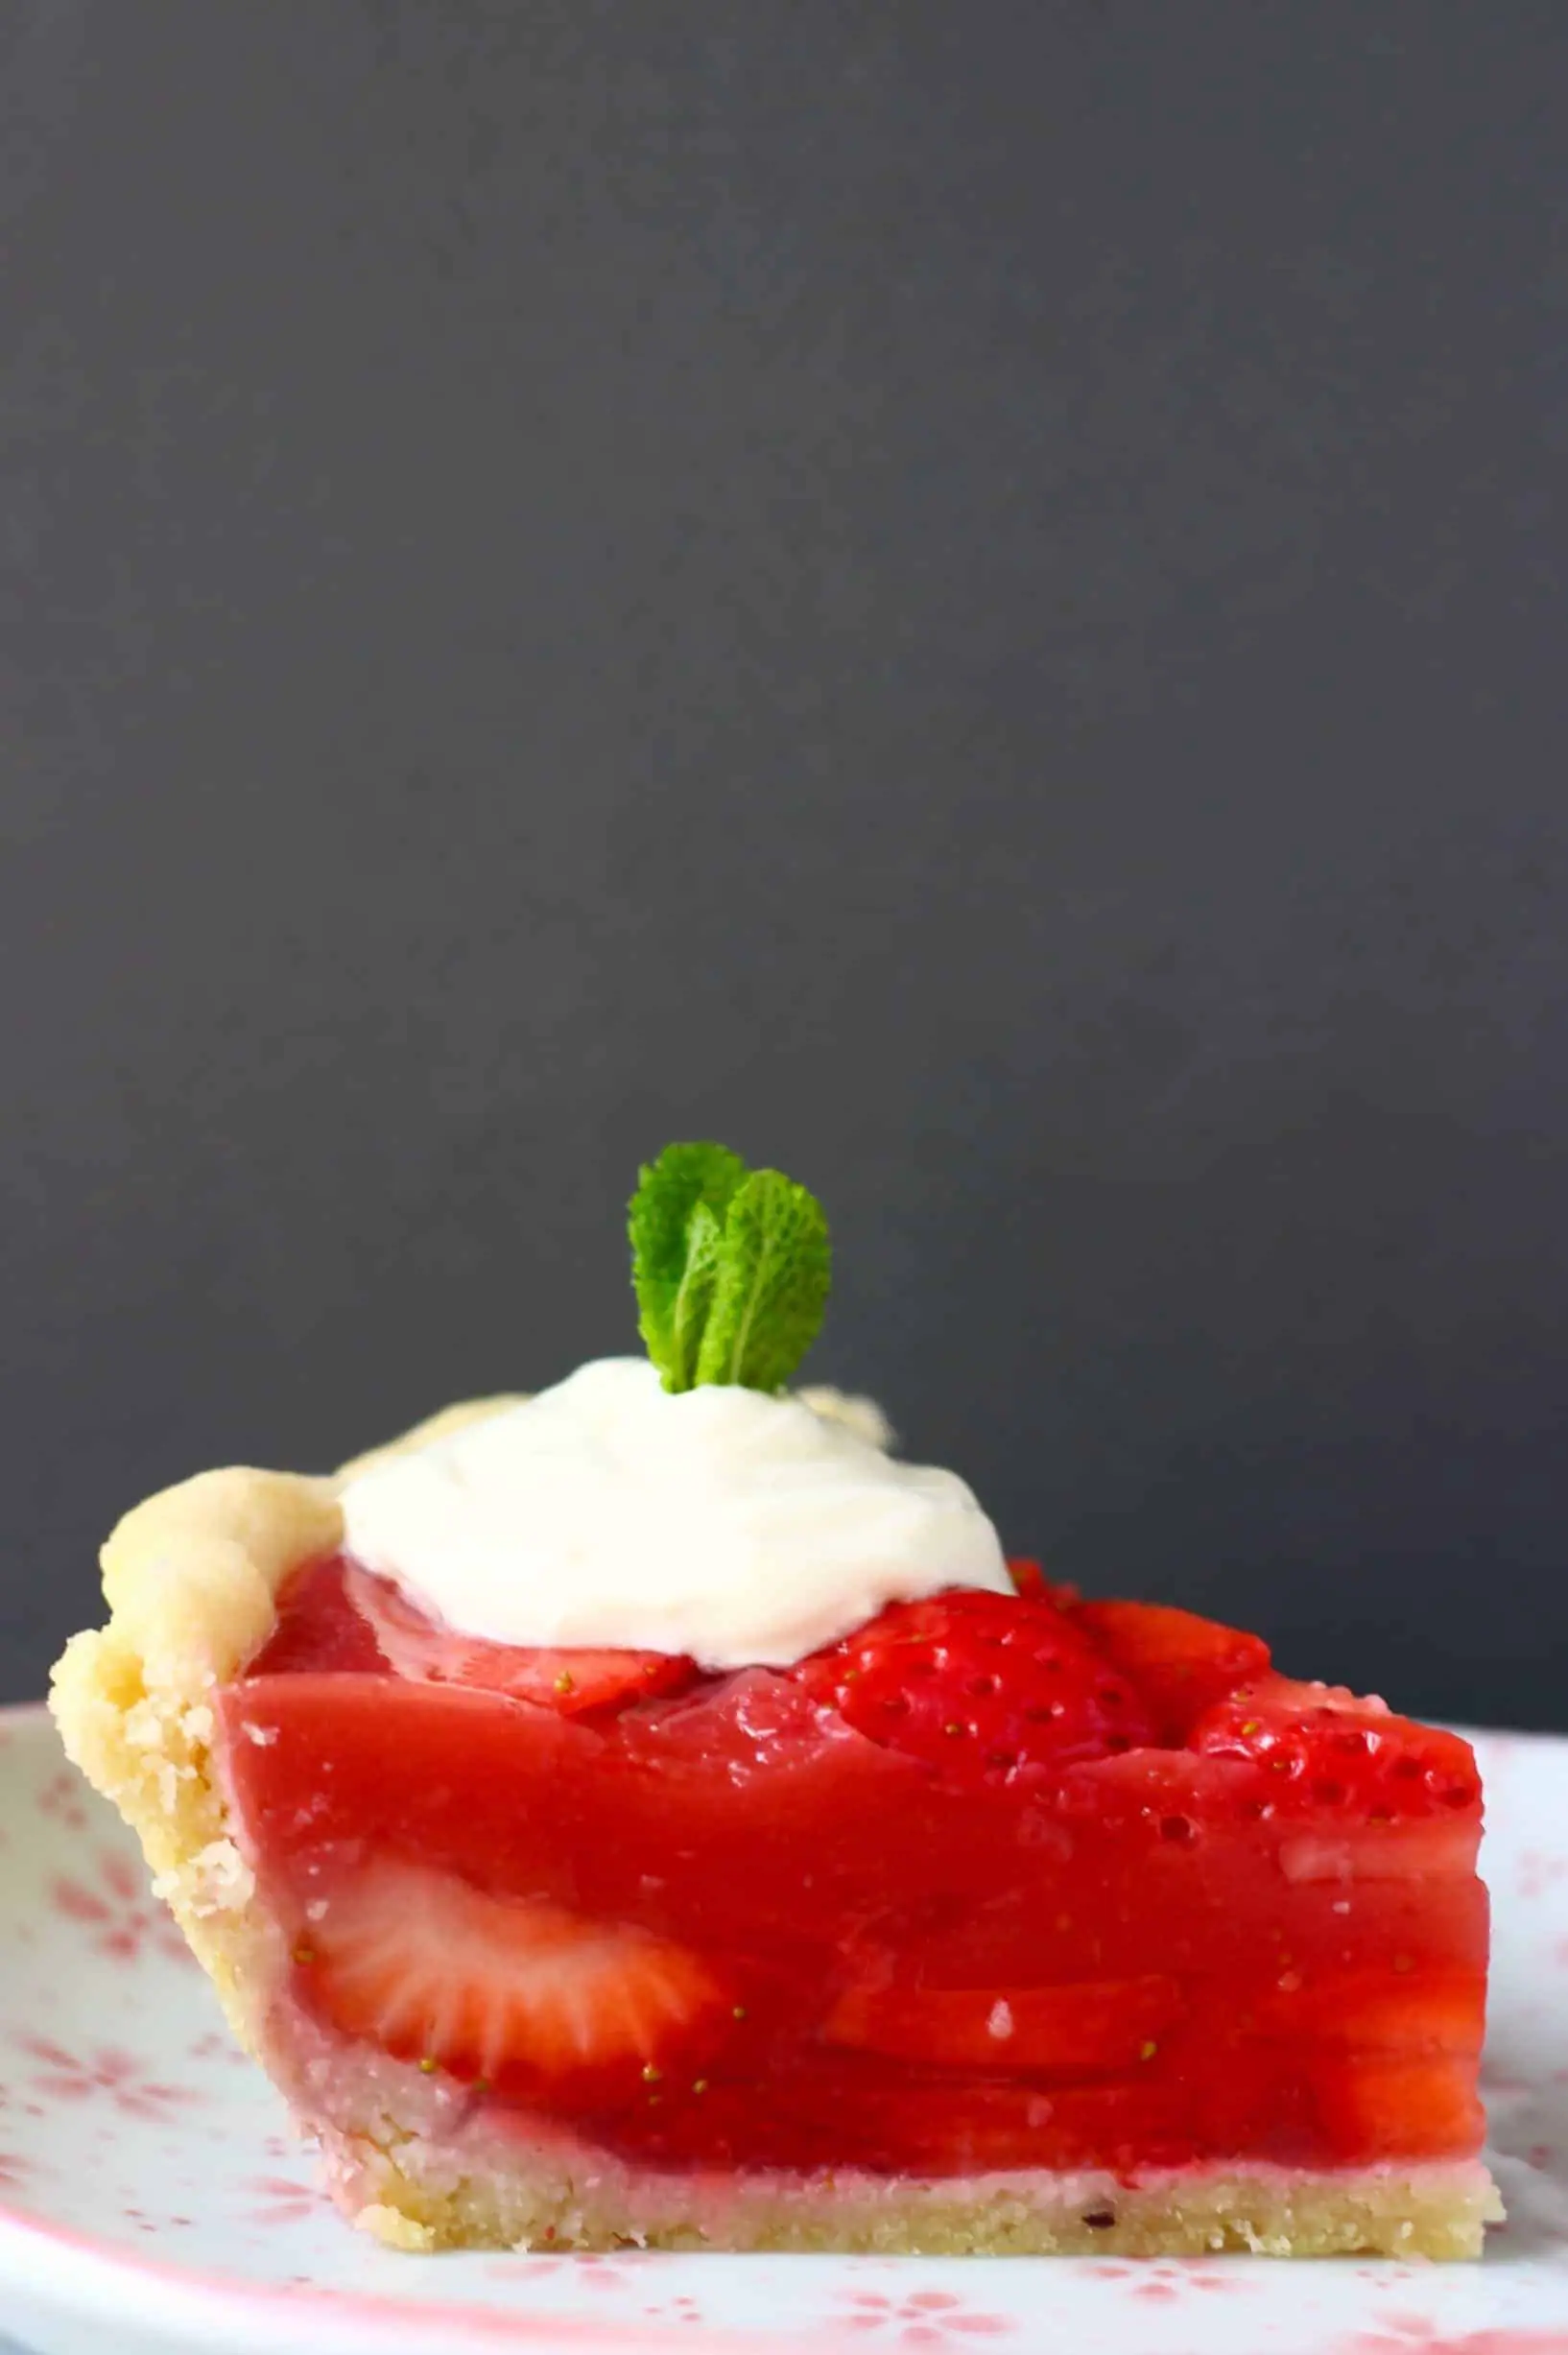 A slice of strawberry pie topped with white cream and a sprig of mint against a grey background